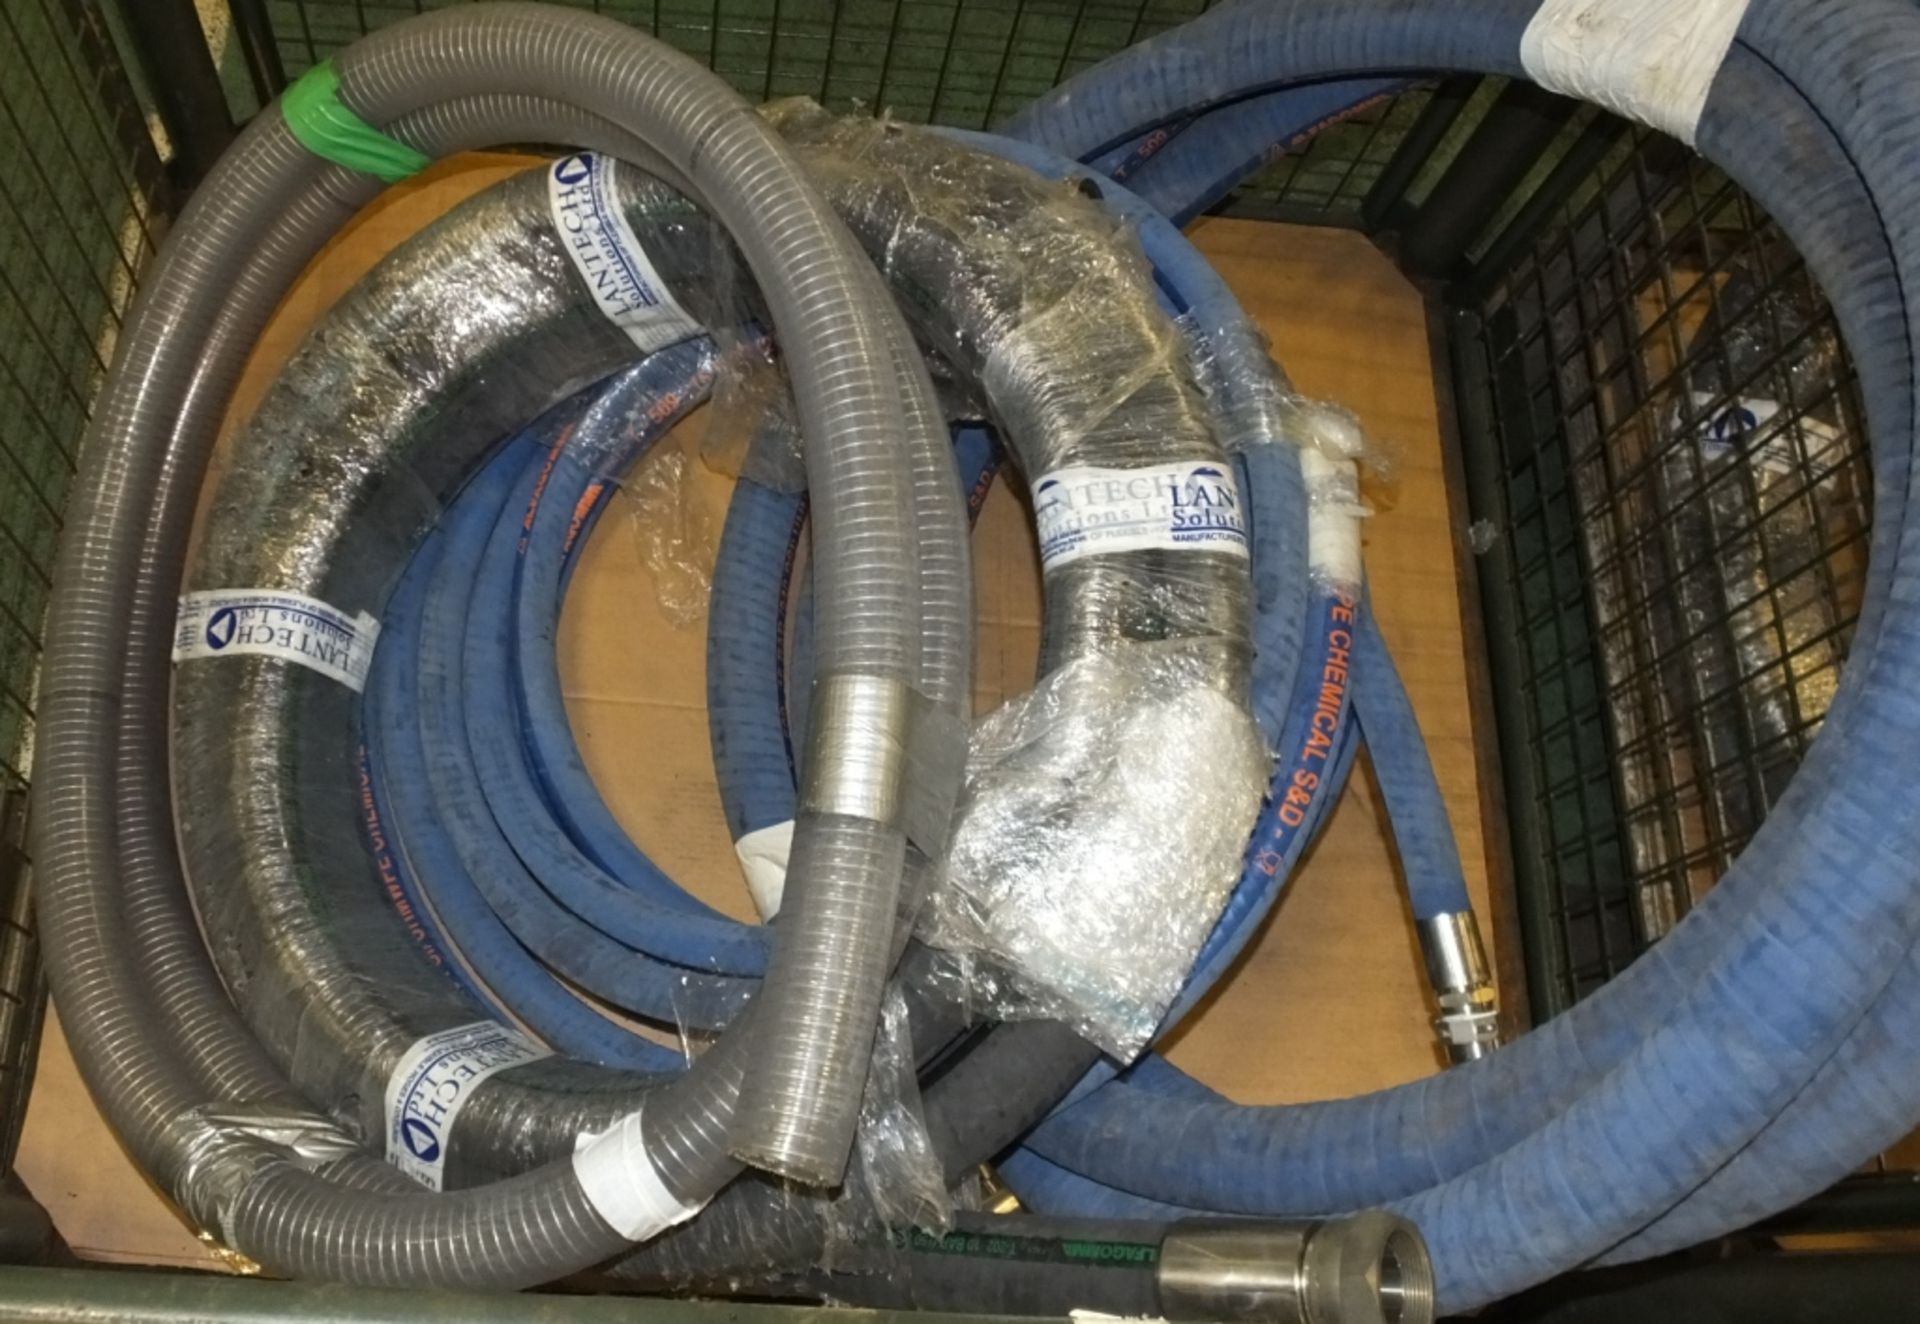 4x Heavy Duty Hoses - including Alfagomma T-509 (240 PSI) chemical - Image 3 of 4